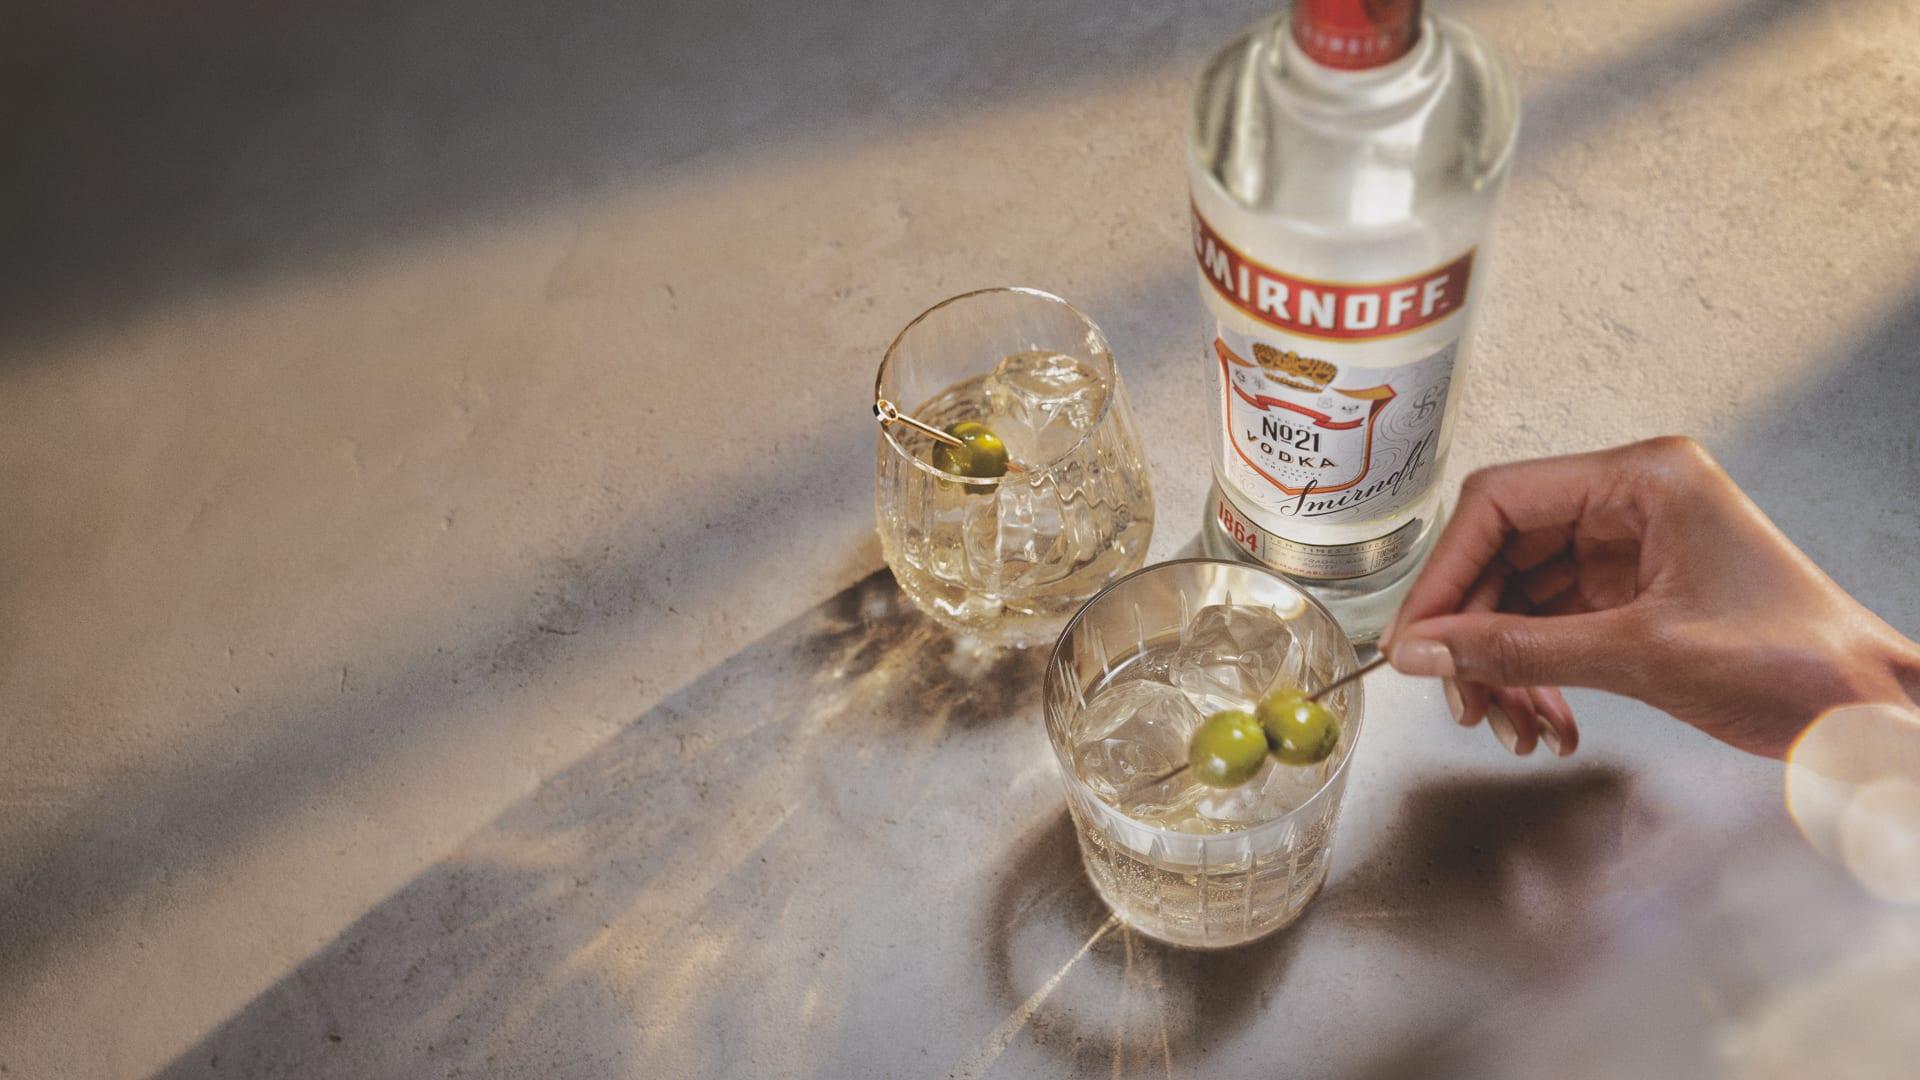 Smirnoff No 21 with two cocktails